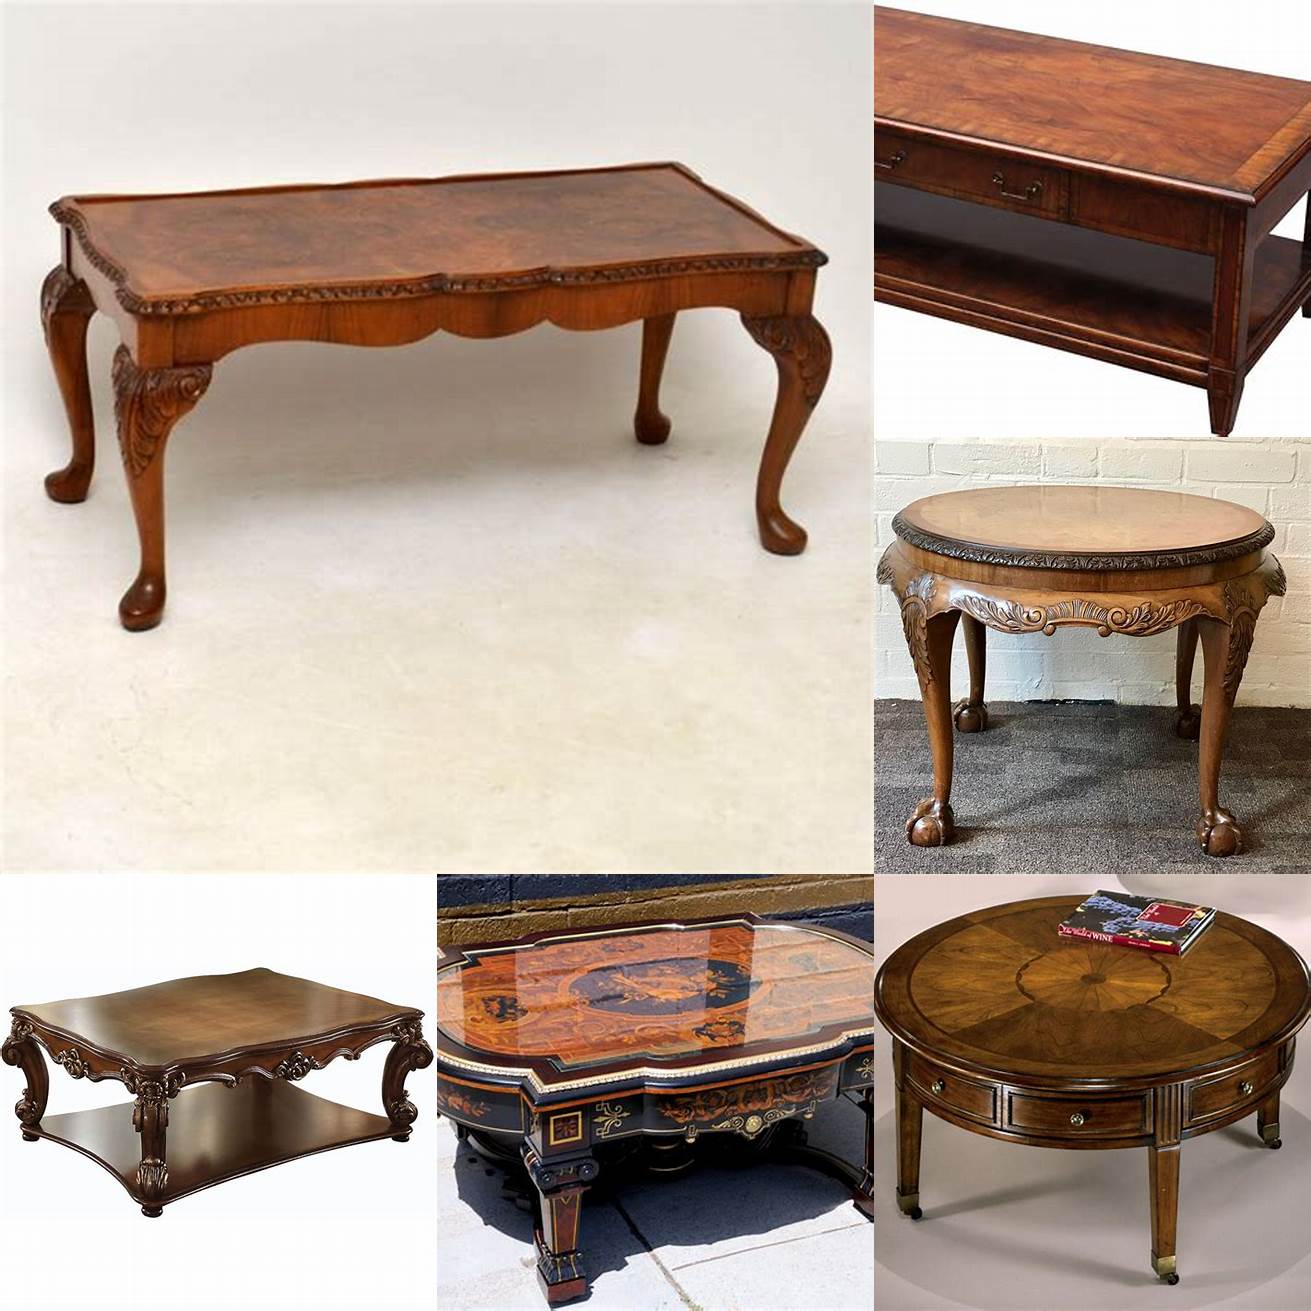 An Antique Coffee Table